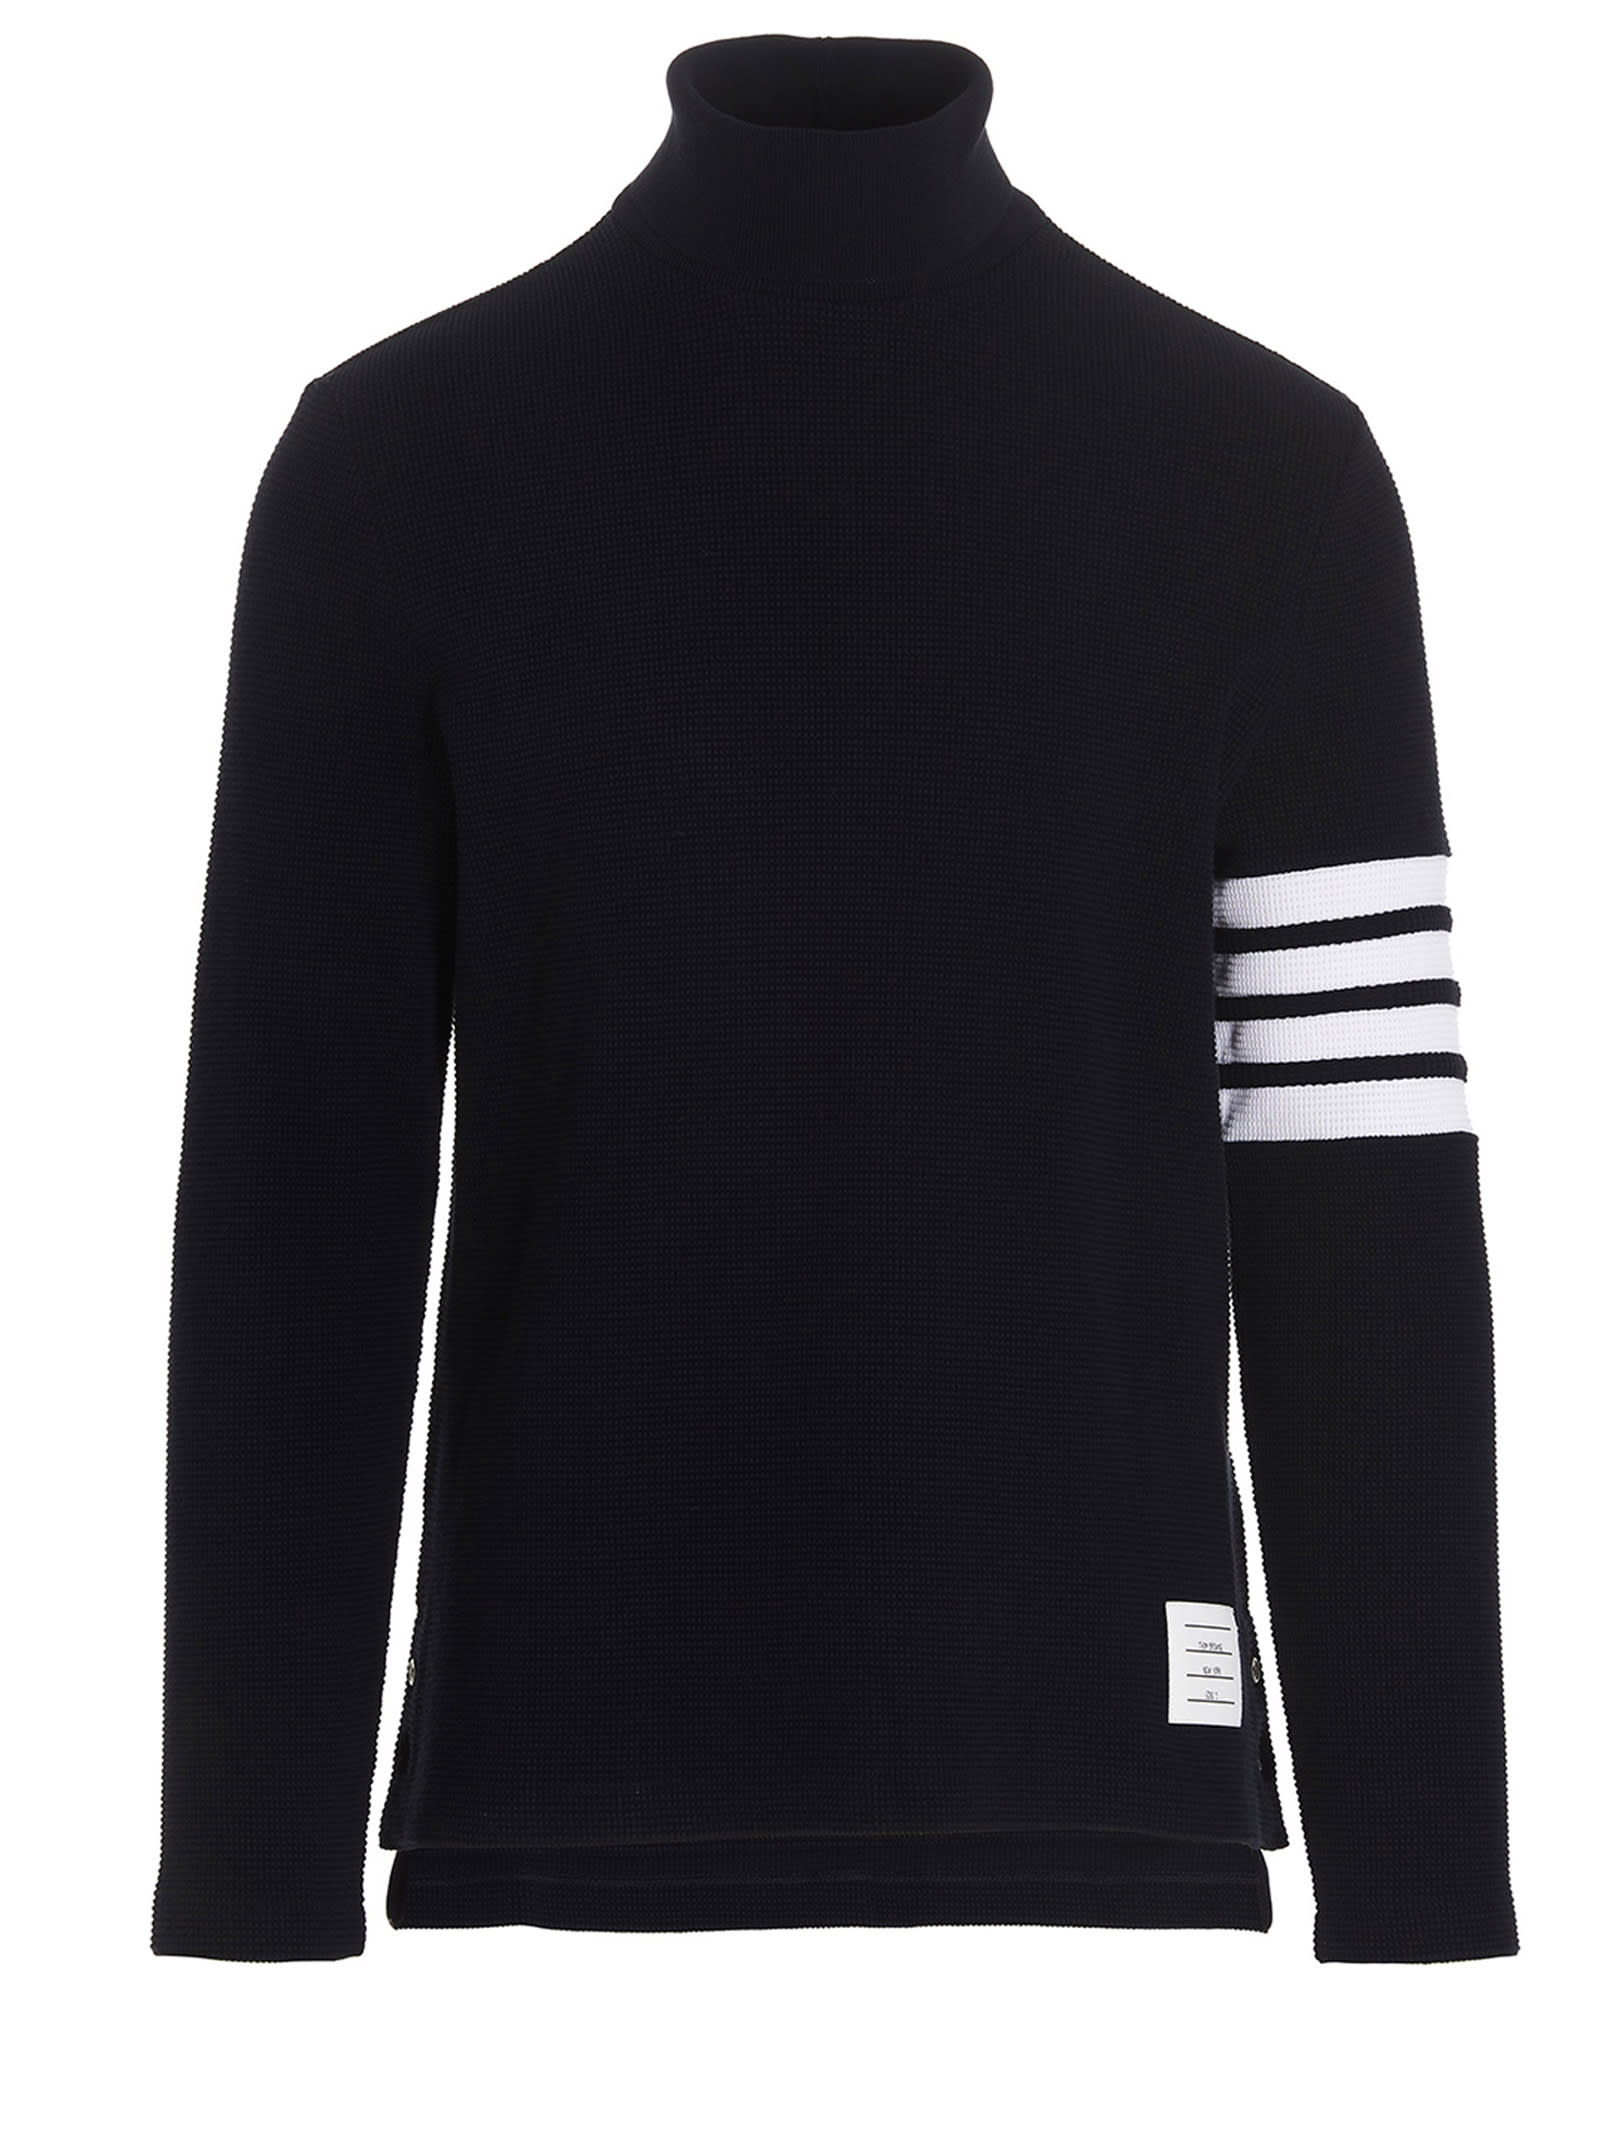 Thom Browne compact Waffle Polo Neck